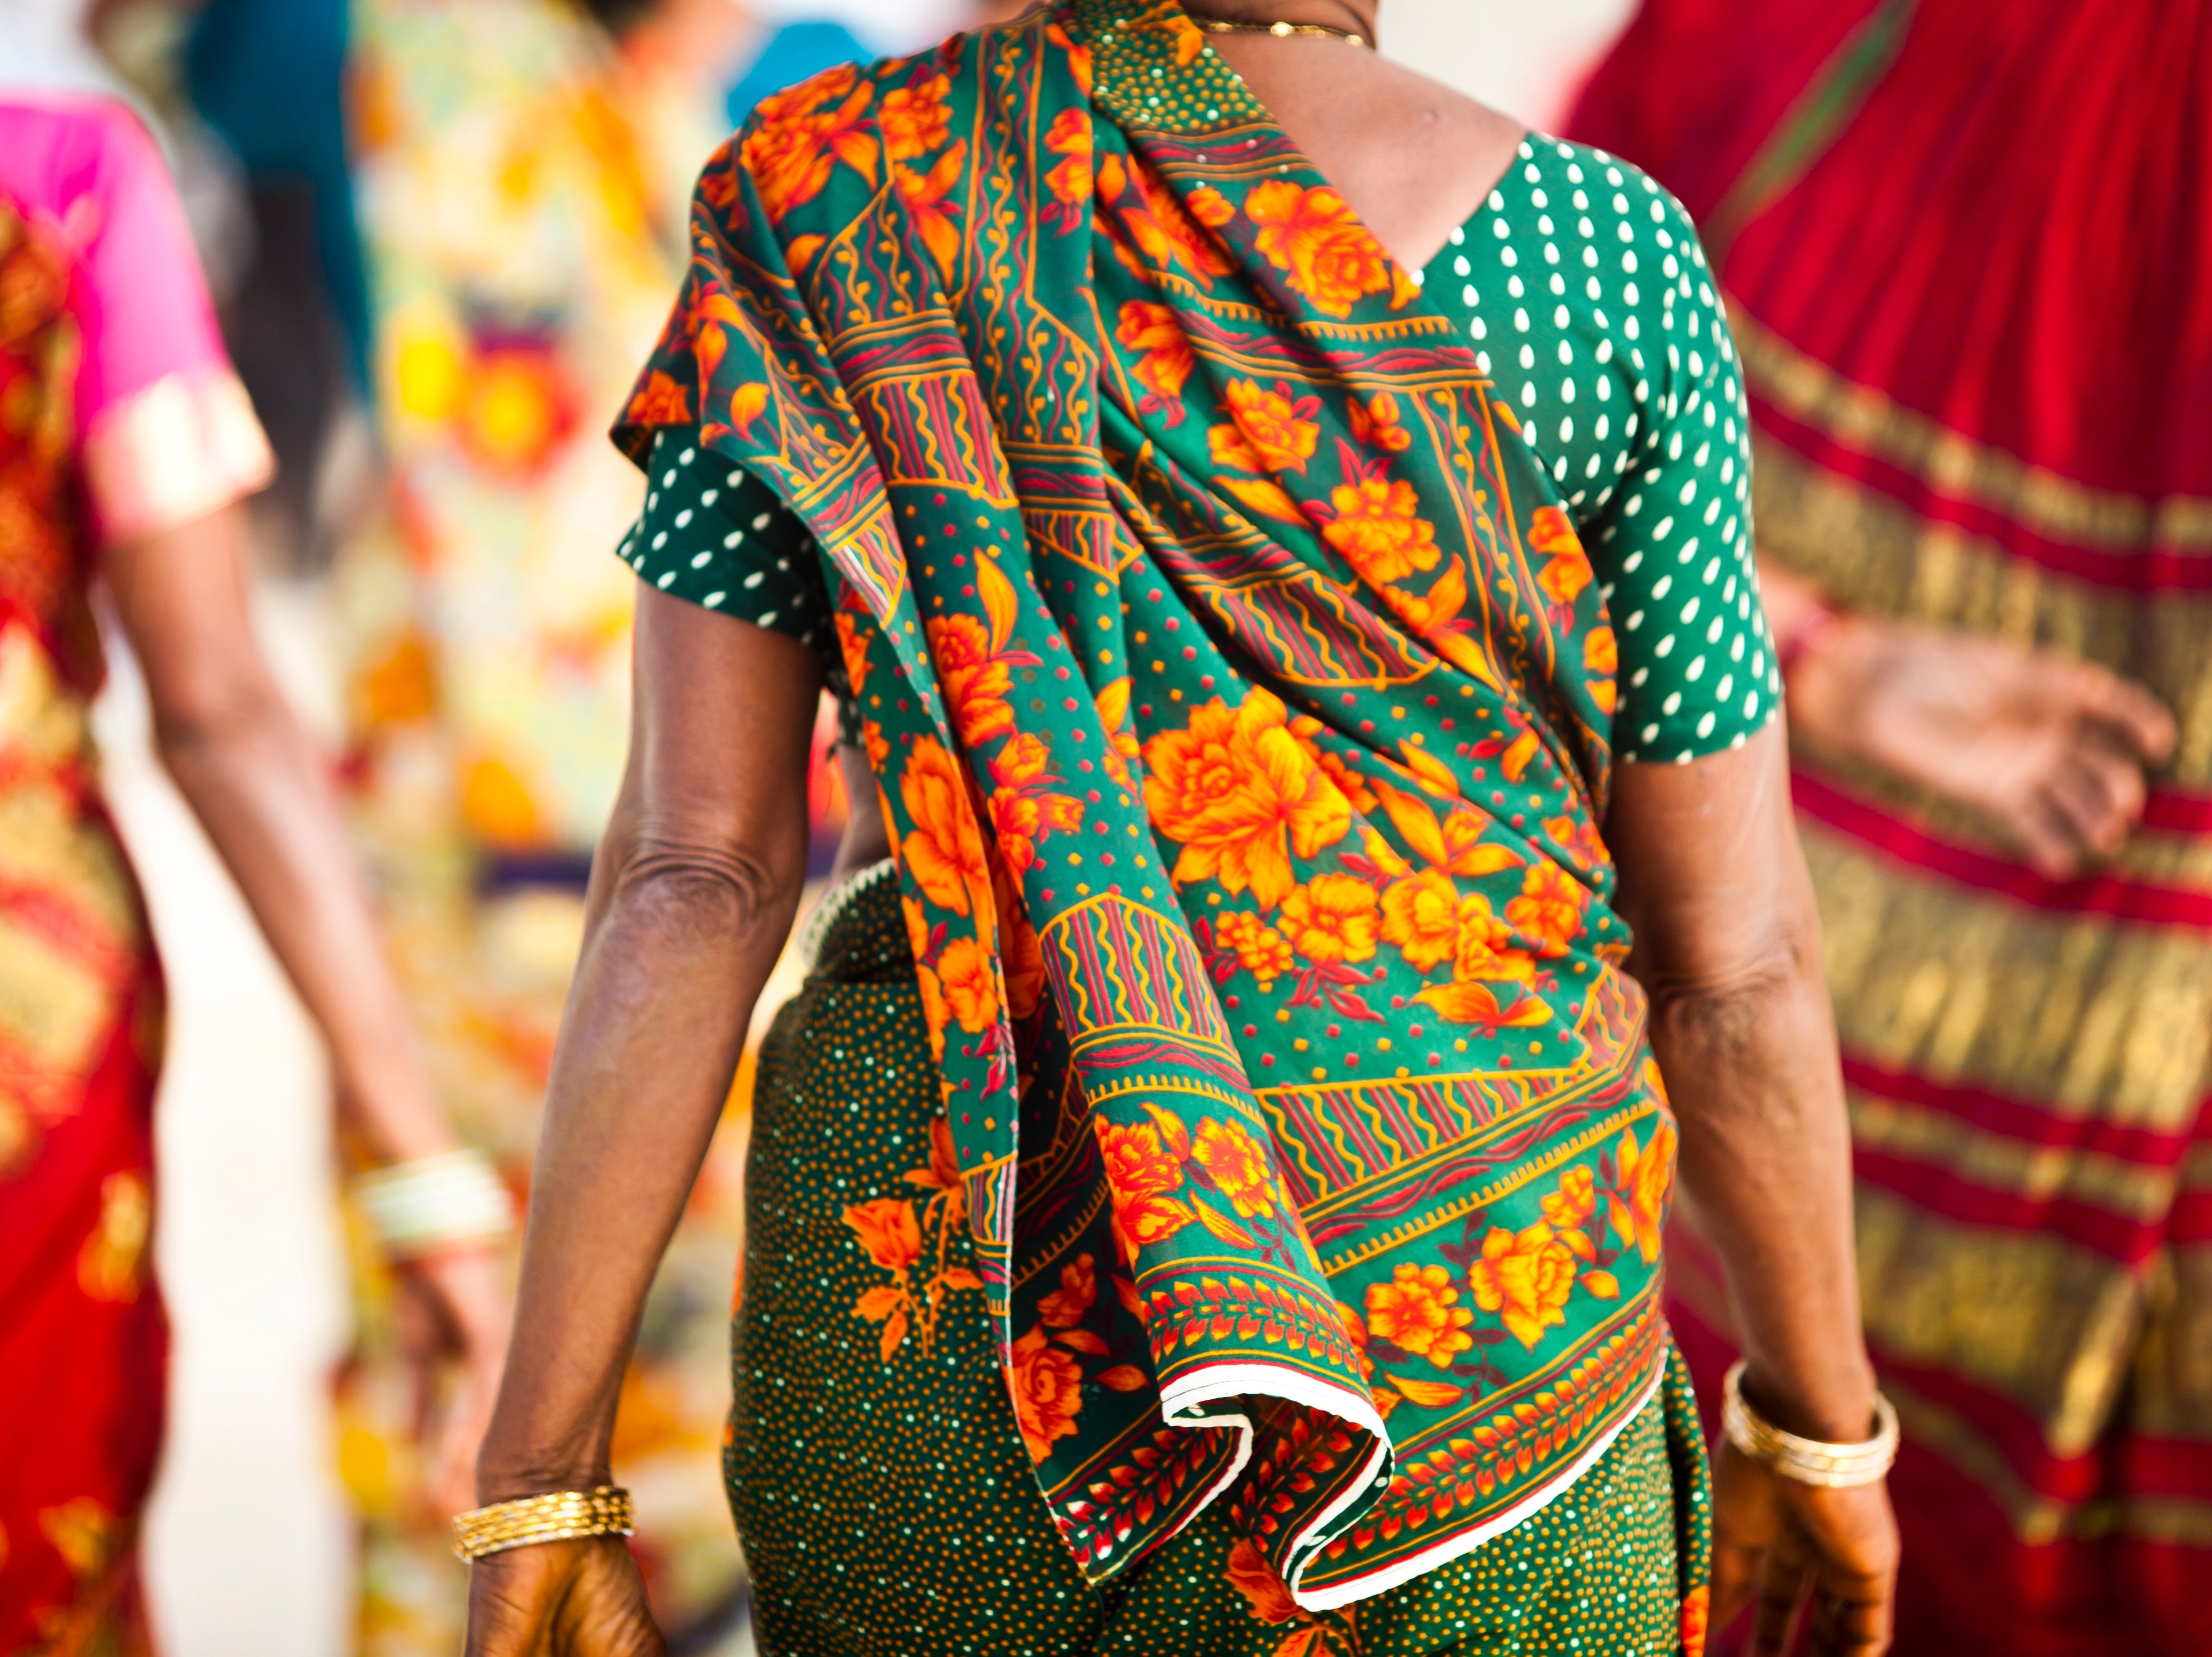 An art of expression in the modern age, the sari is adorning catwalks as a fashionable but adaptable garment